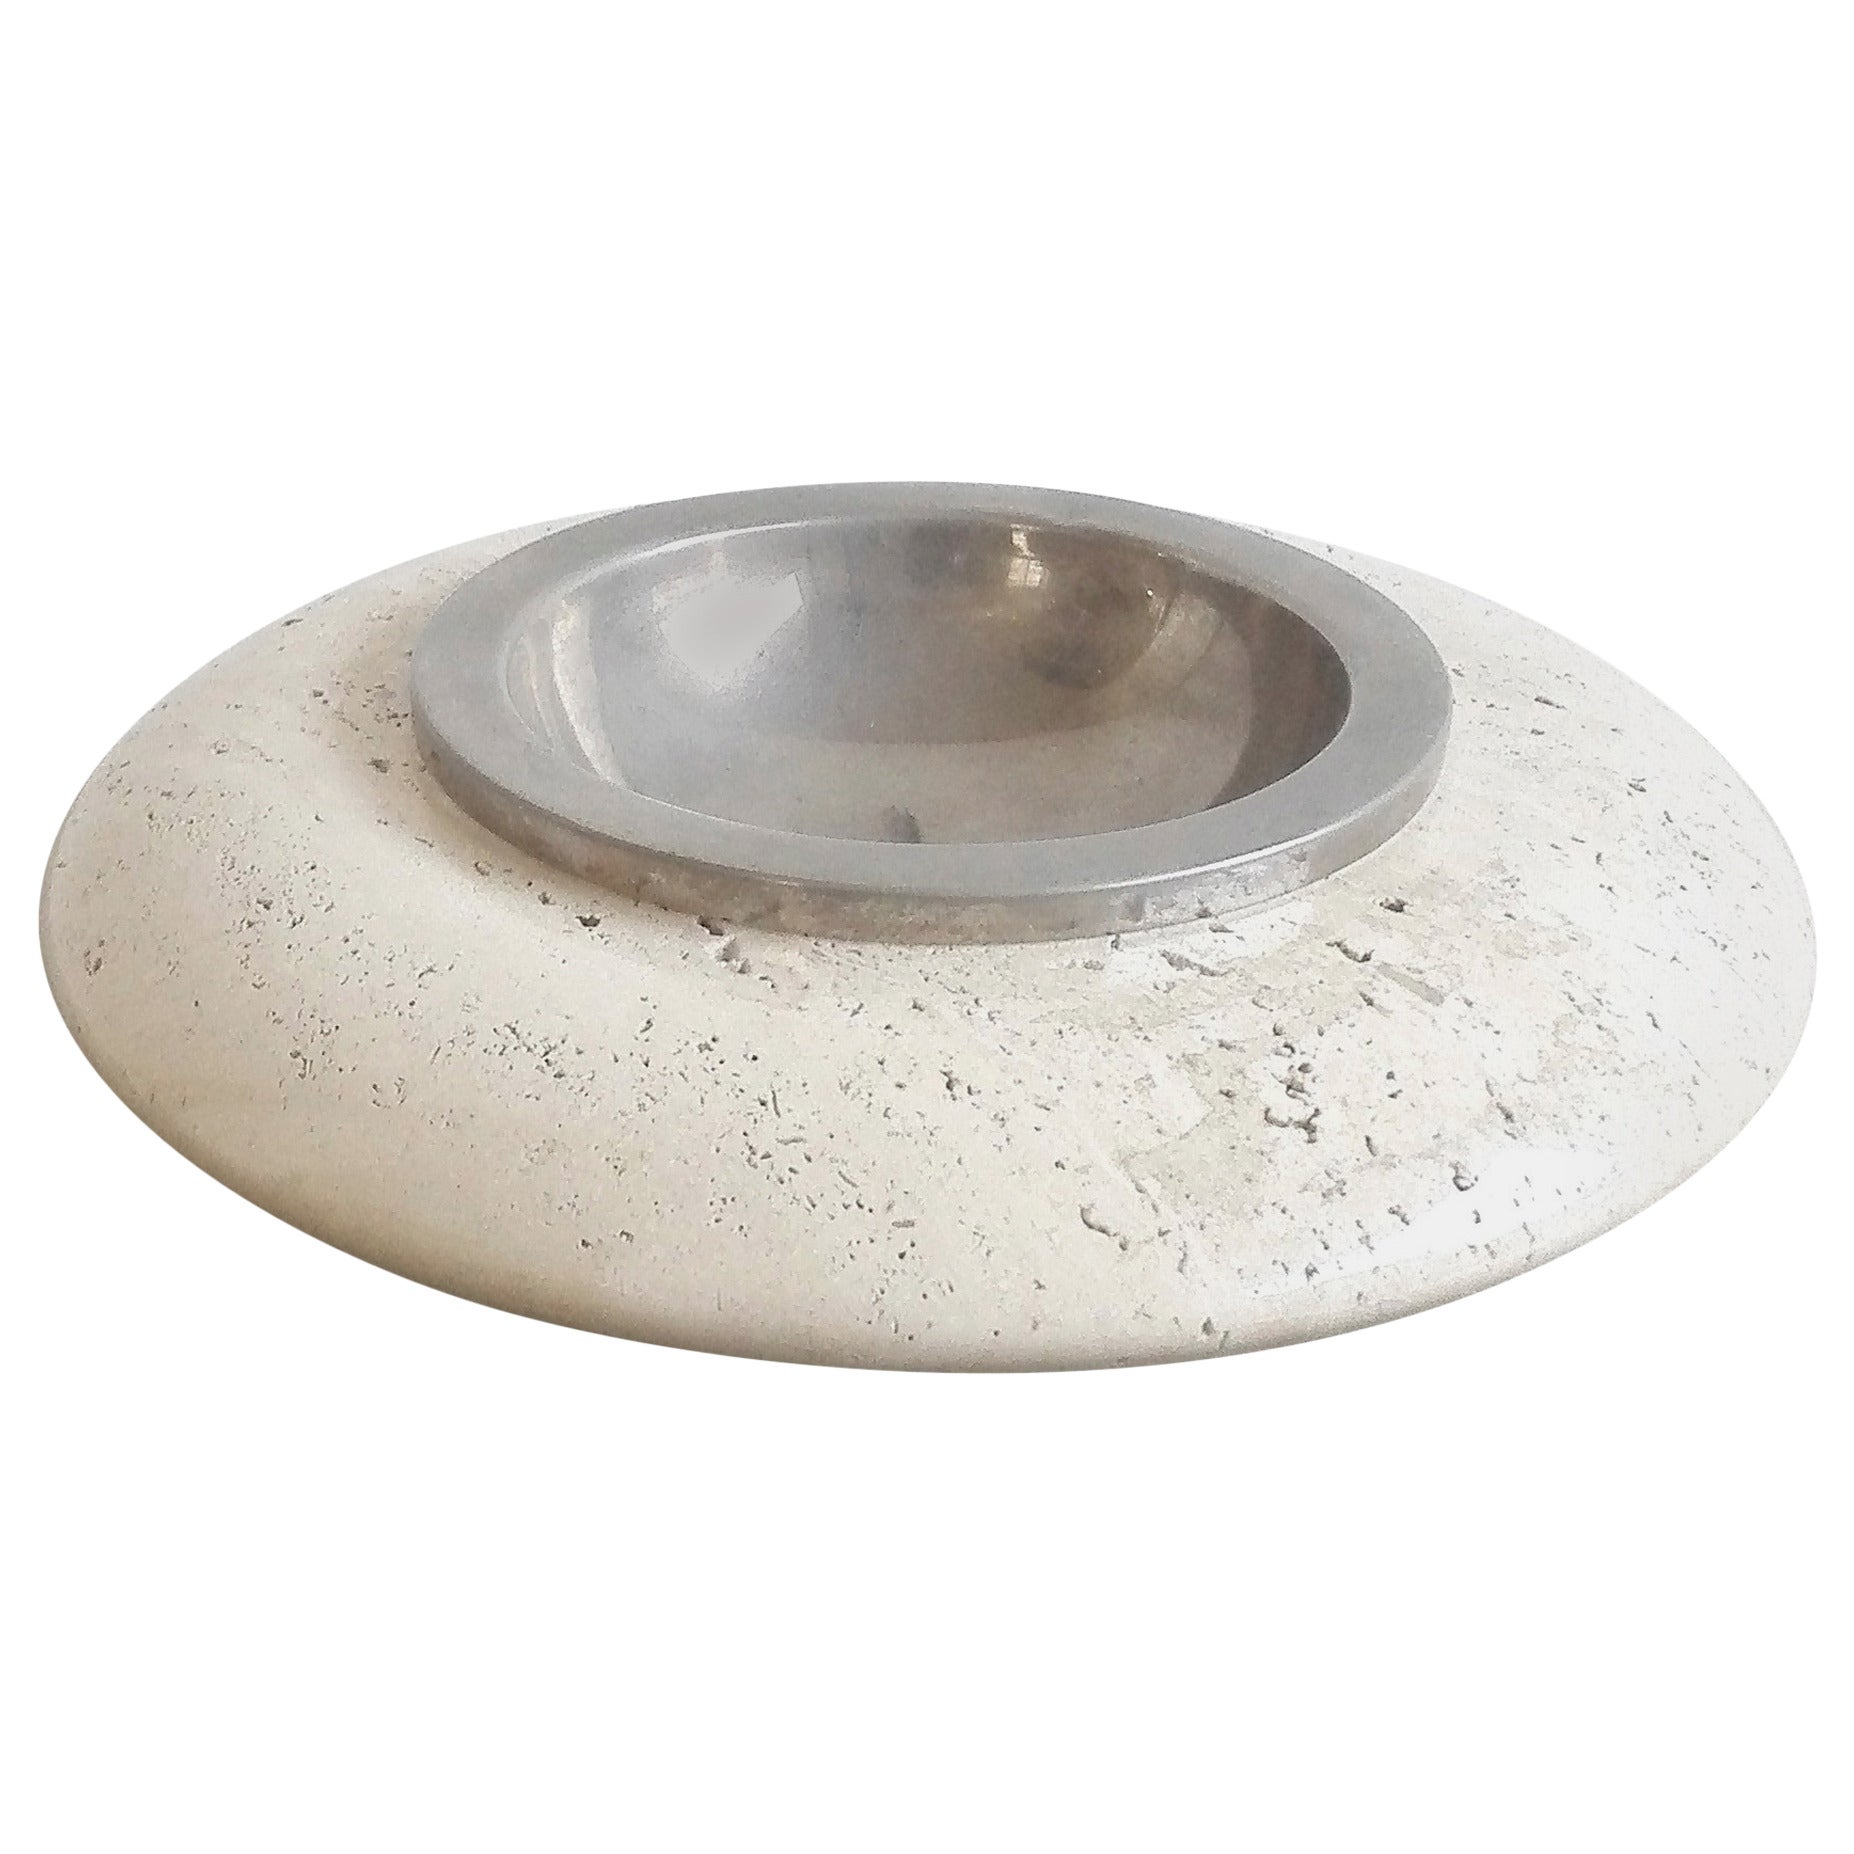 Stainless Steel and Travertine Ashtray by Maison Barbier, France 1970s